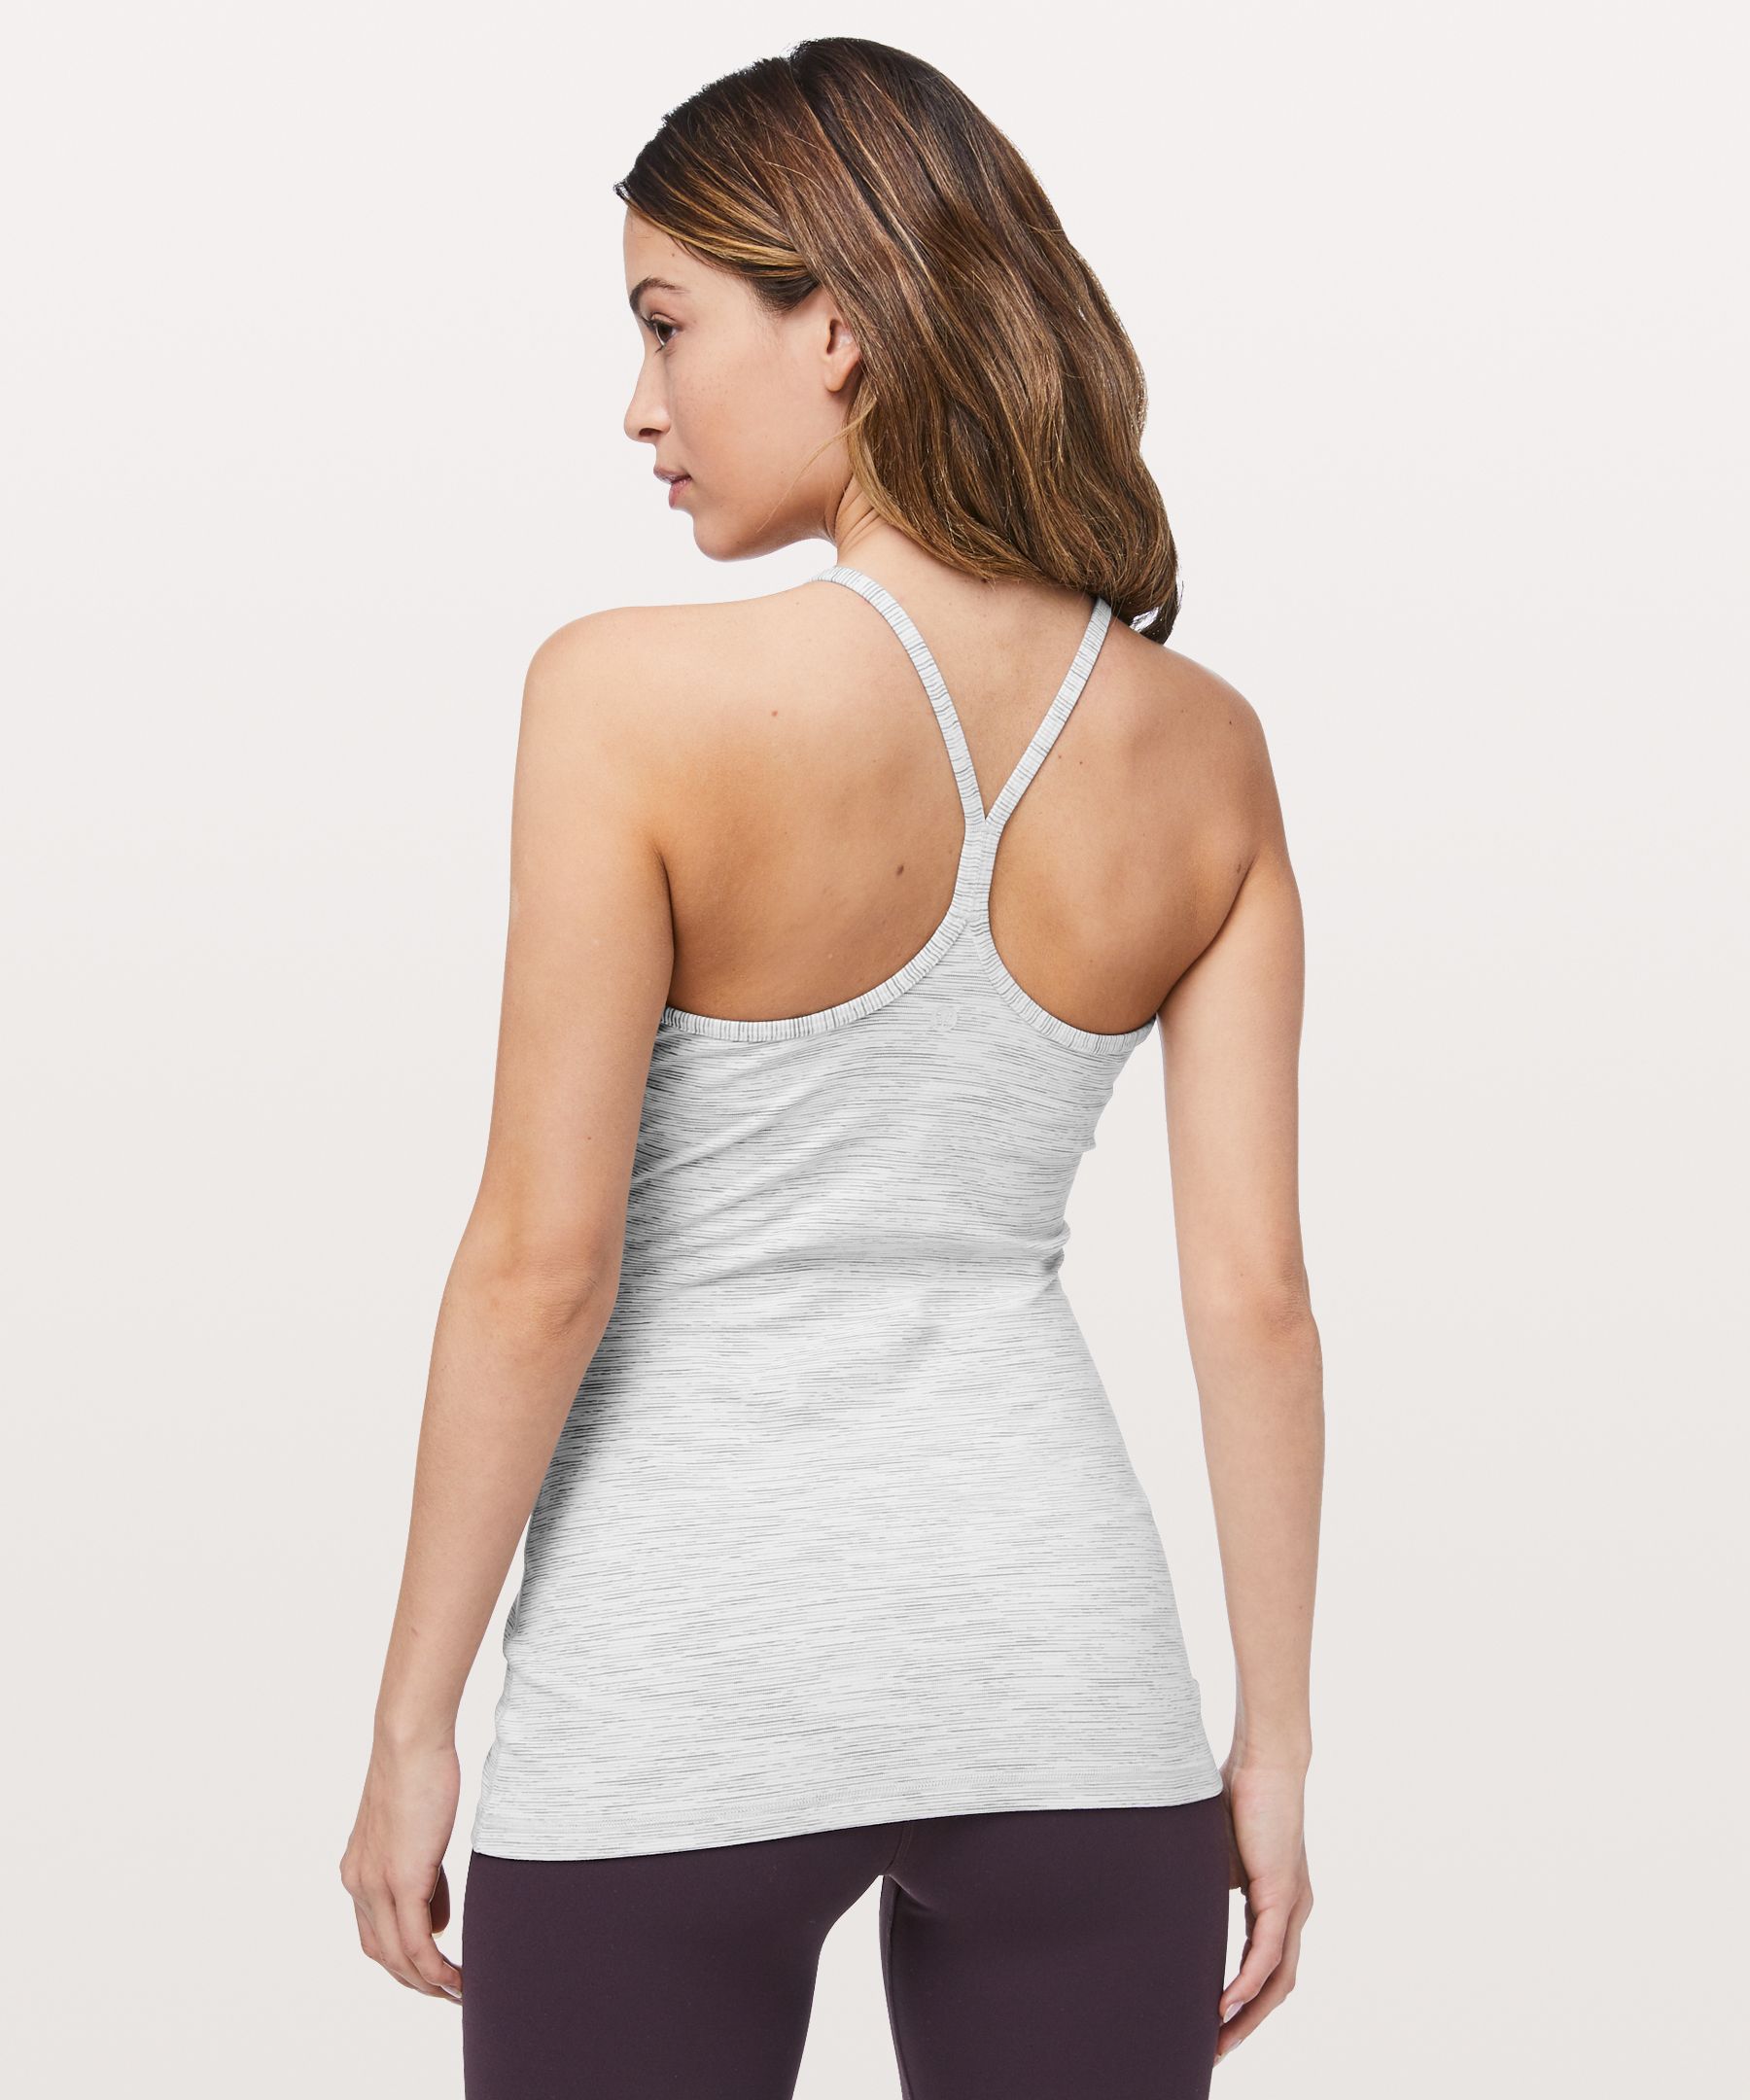 Lululemon Power Y Tank in Wee Are From Space Nimbus Battleship Gray Size 10  - $31 - From Amy